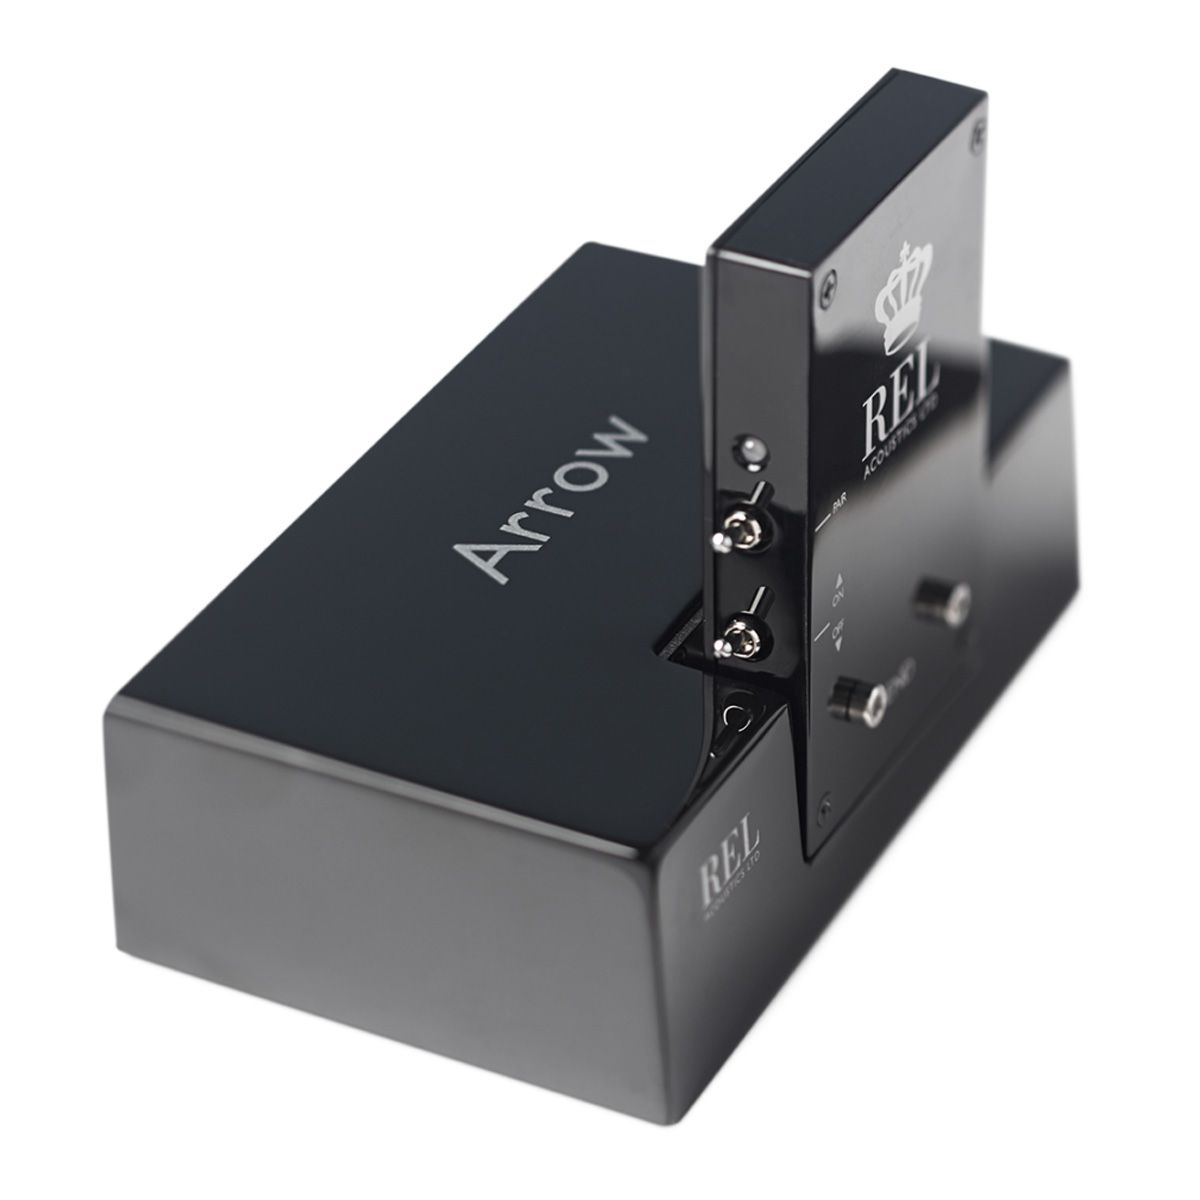 REL Acoustics Arrow Wireless Transmitter / Receiver - side view of transmitter